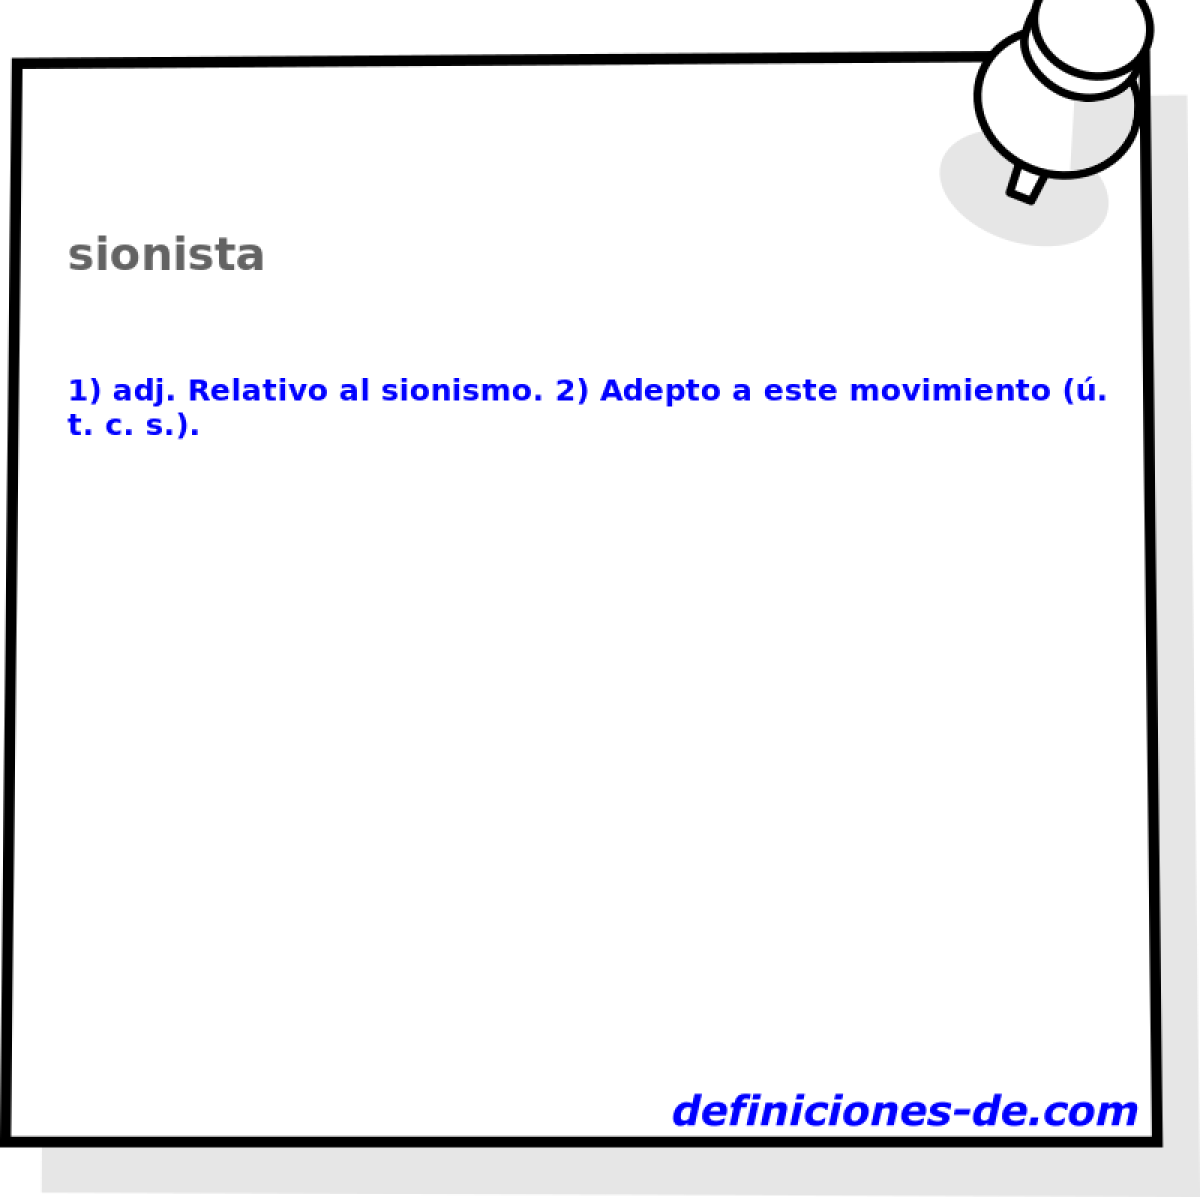 sionista 